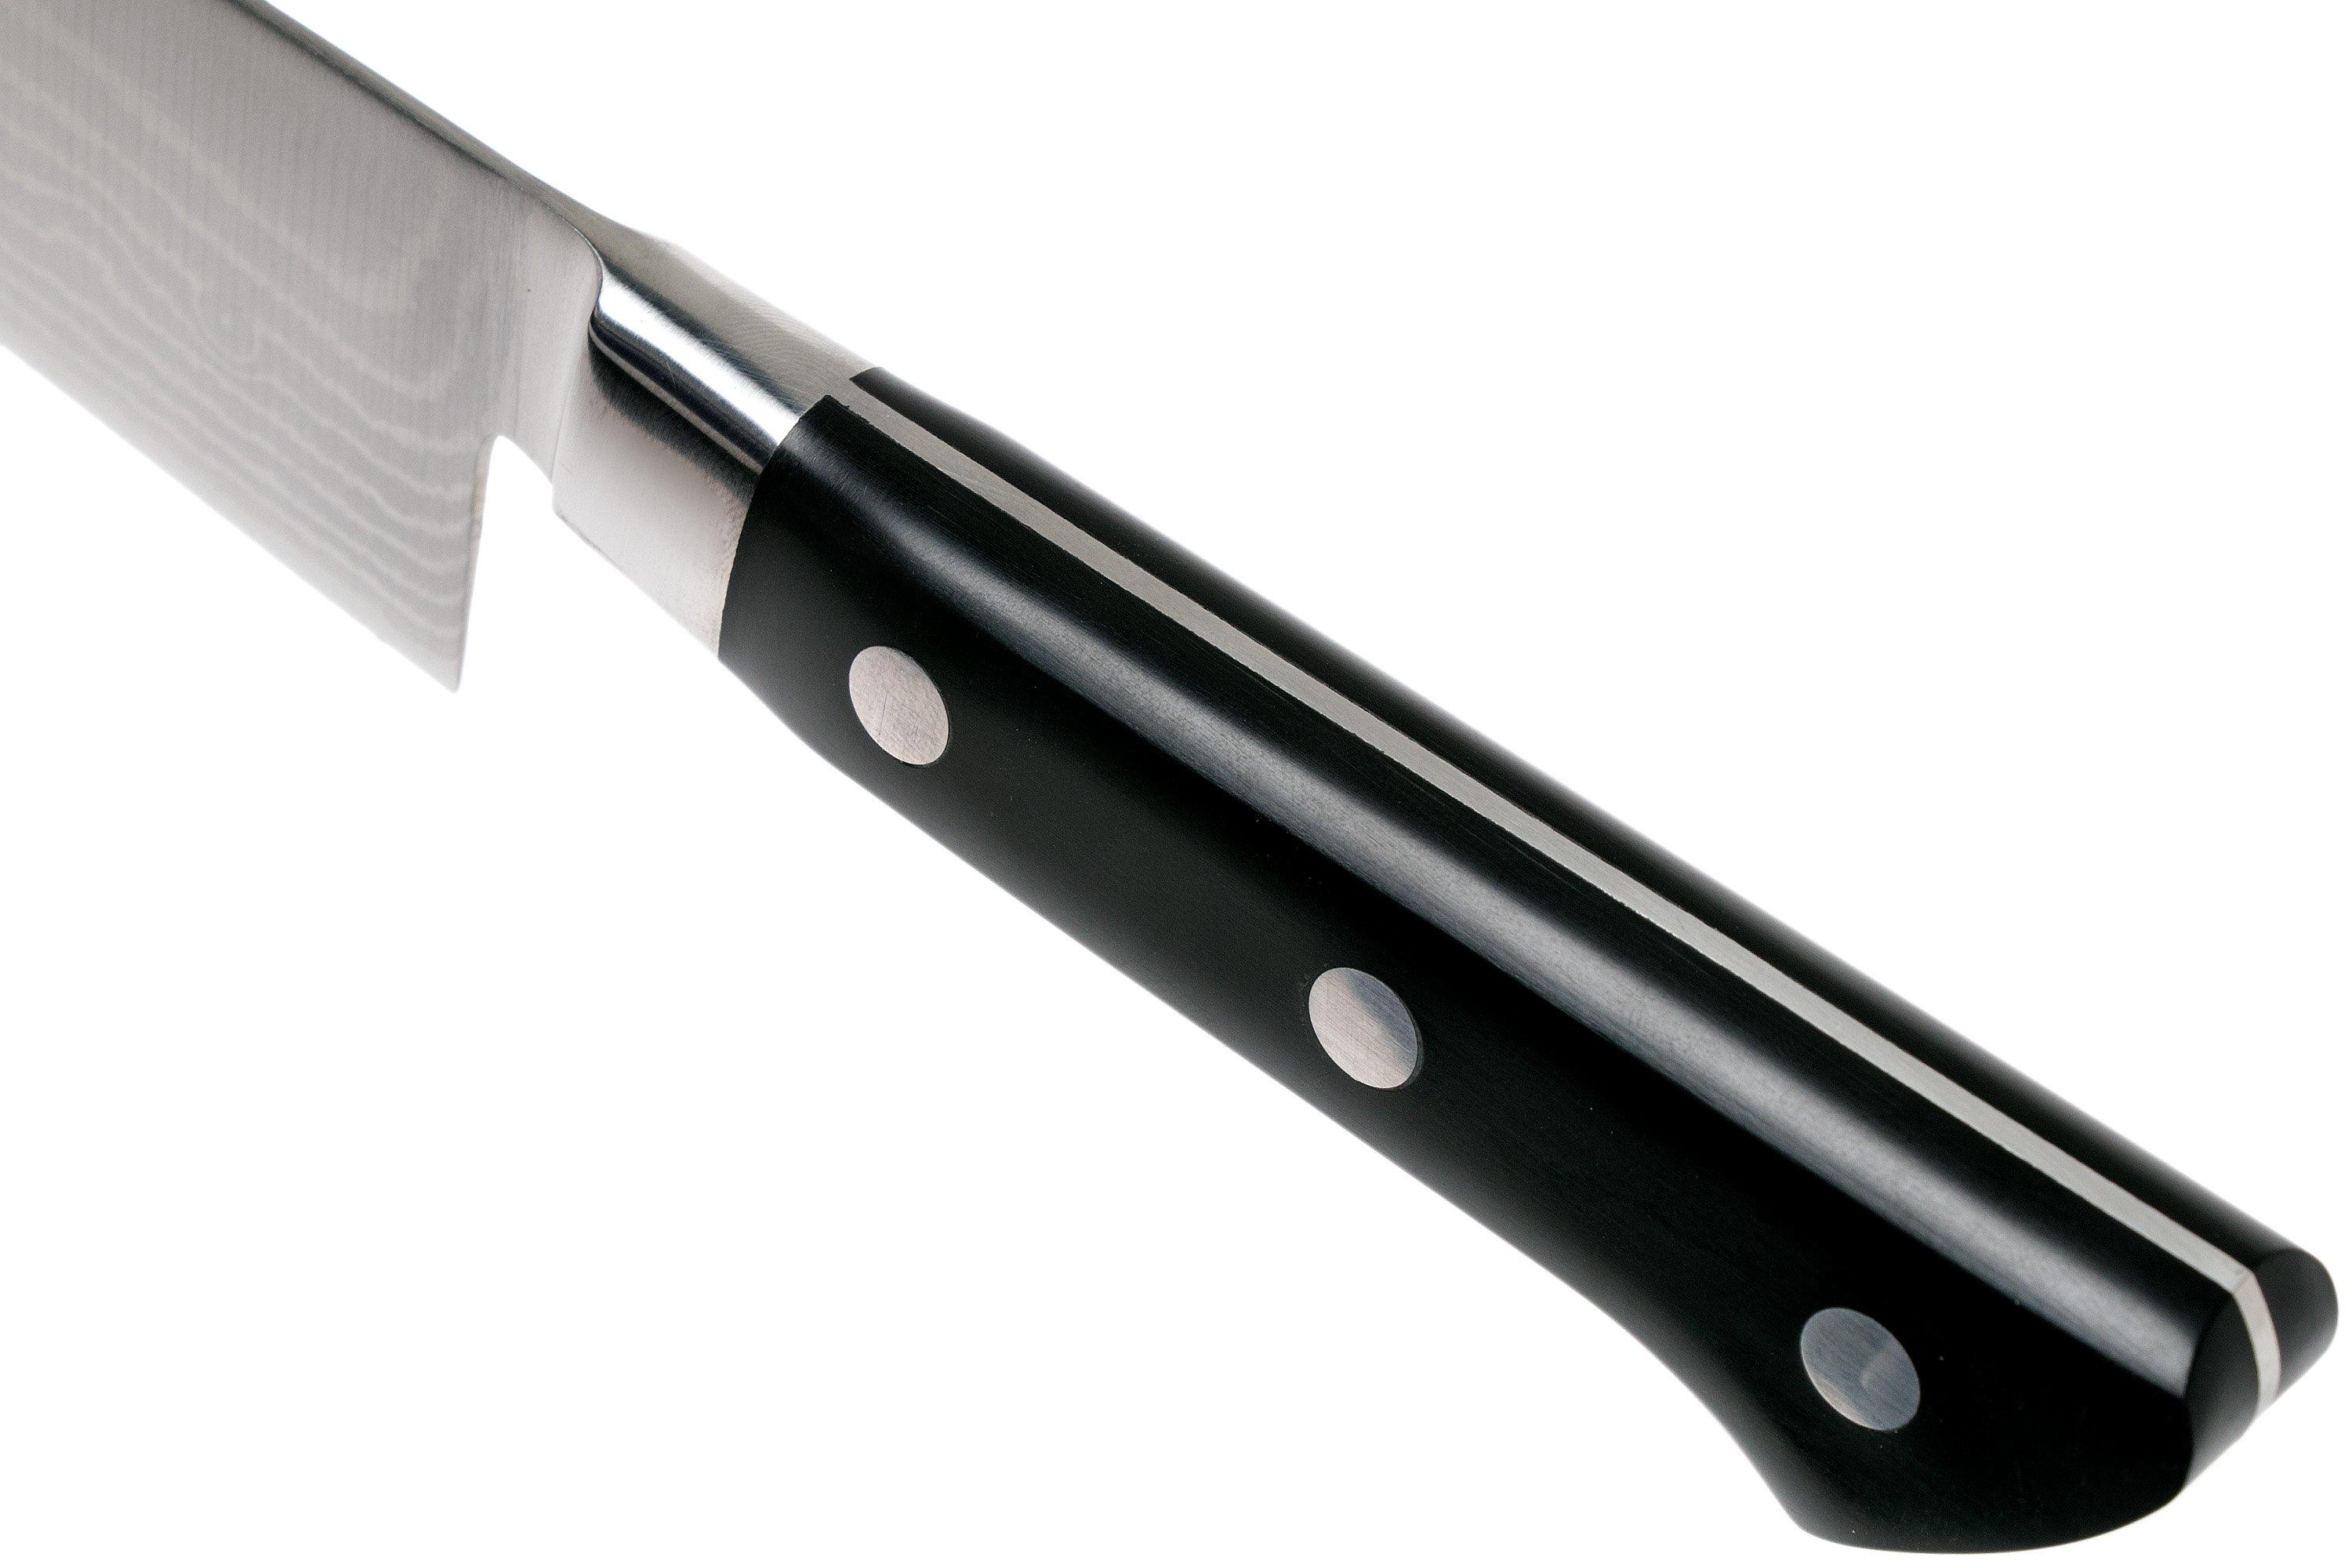  DP 37 layers Chefs Knife 18cm | Advantageously shopping at .